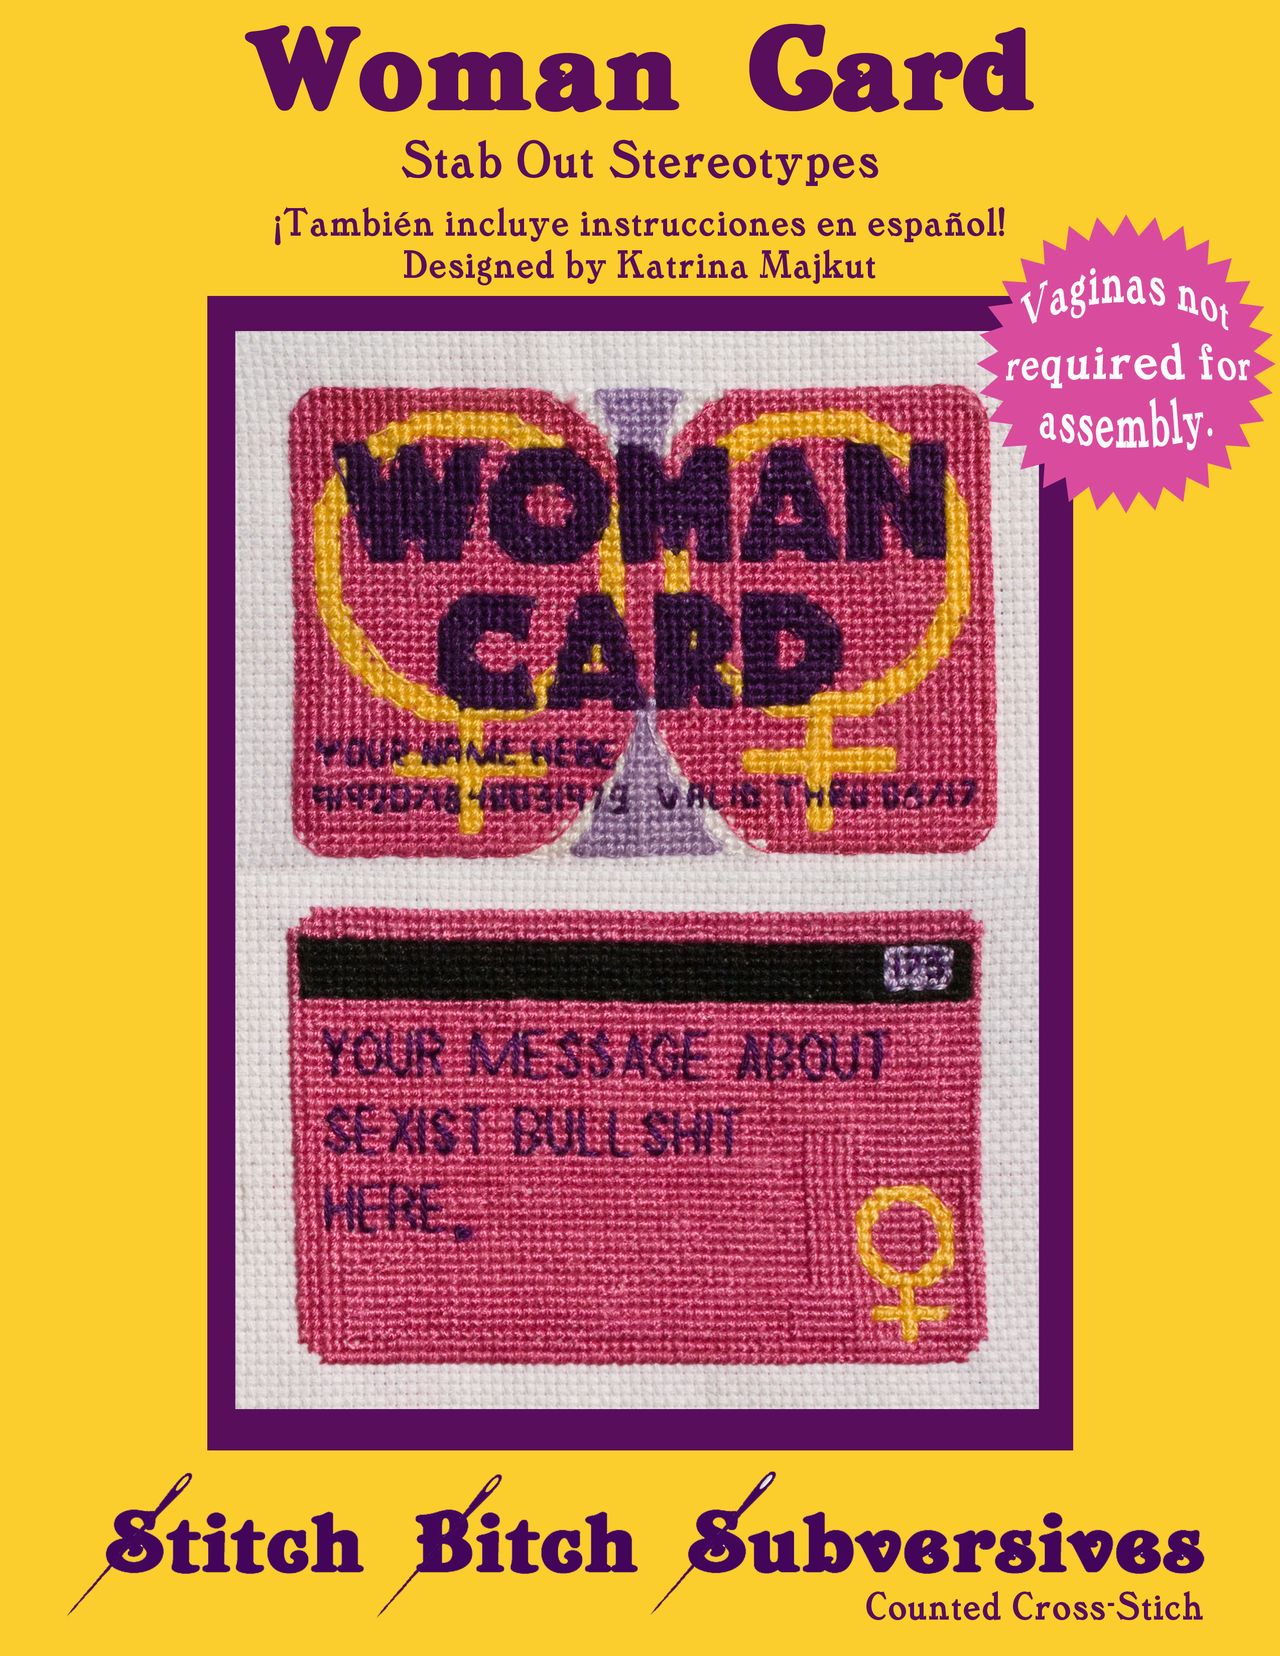 Katrina Majkut, “The Woman Card - Limited Edition Kit,” 2017, Thread on cross-stitch fabric, 8.5 x 11 inches, Edition of 50